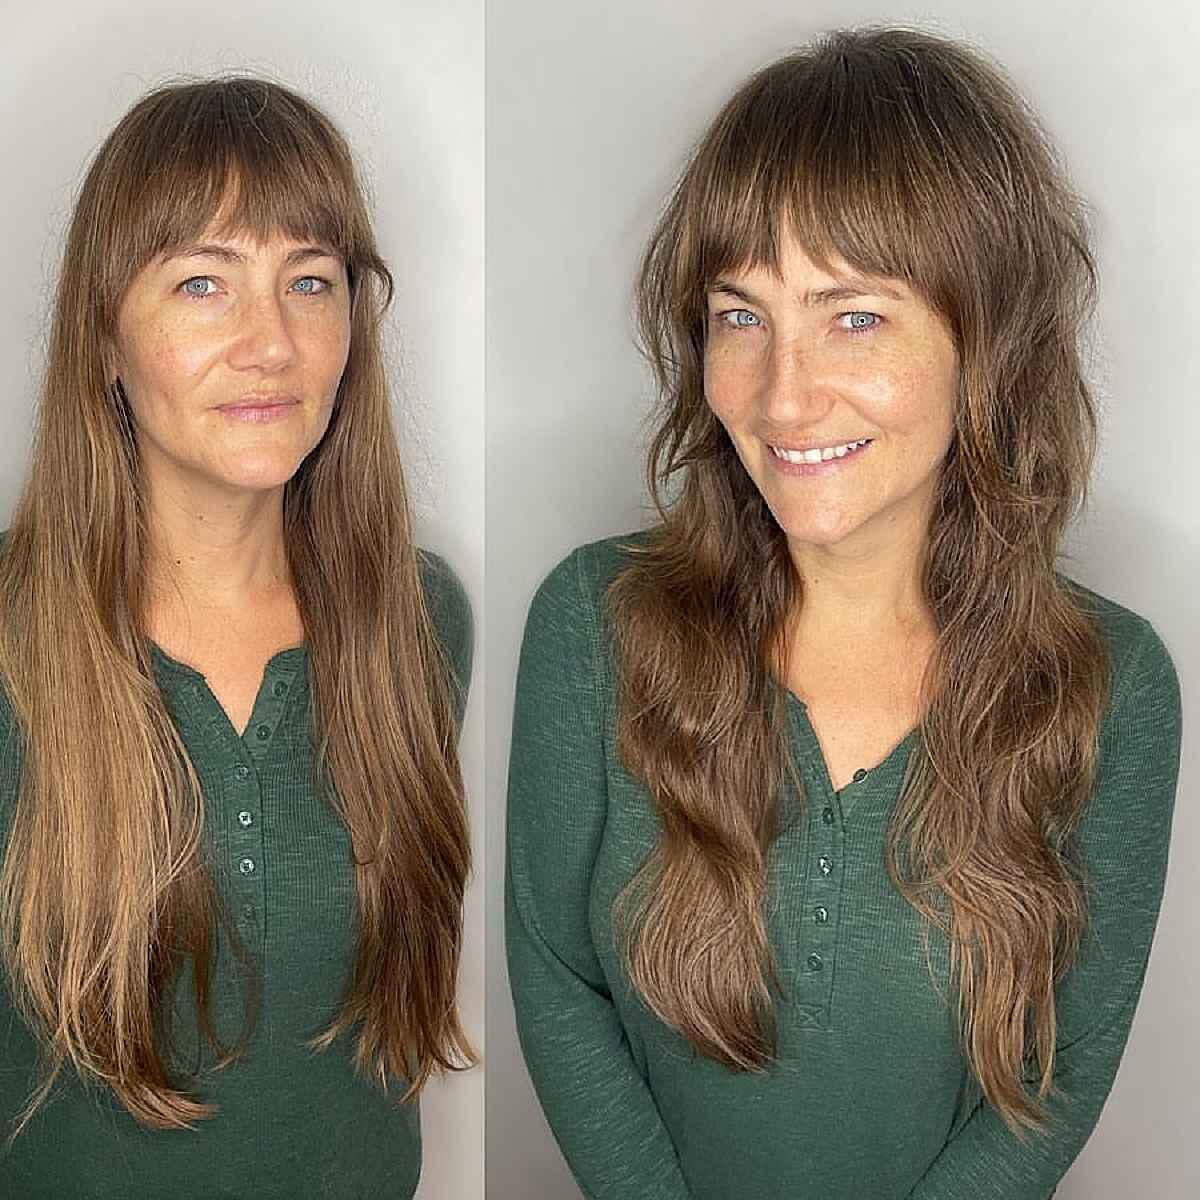 15 Flattering Ways to Wear Bangs for Square Face Shapes